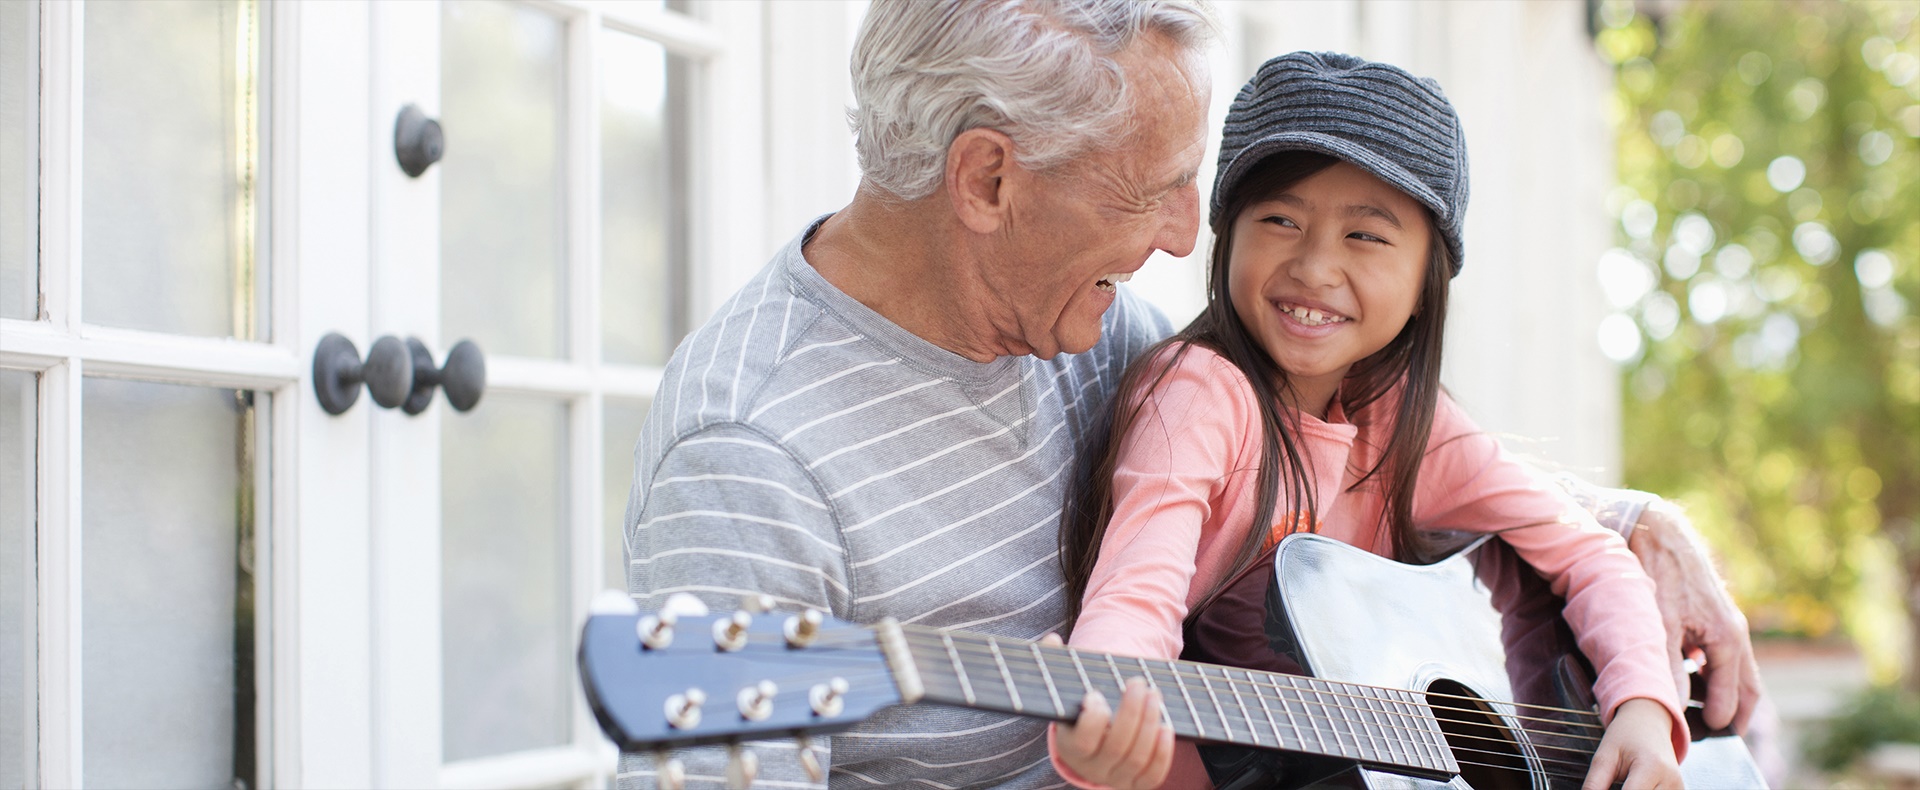 Grandfather and granddaughter playing the guitar